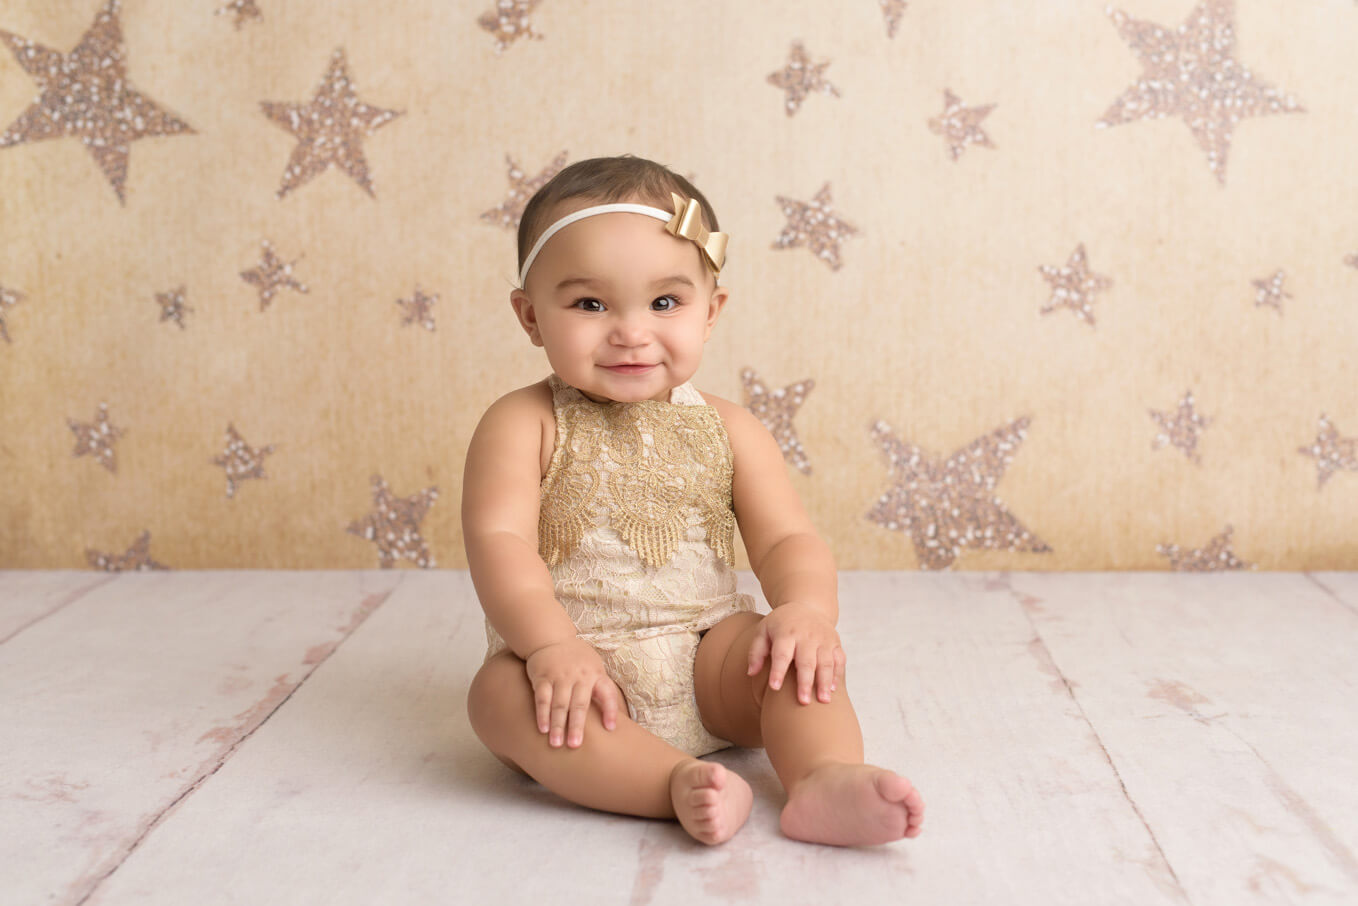 one year old baby sitting with star backdrop